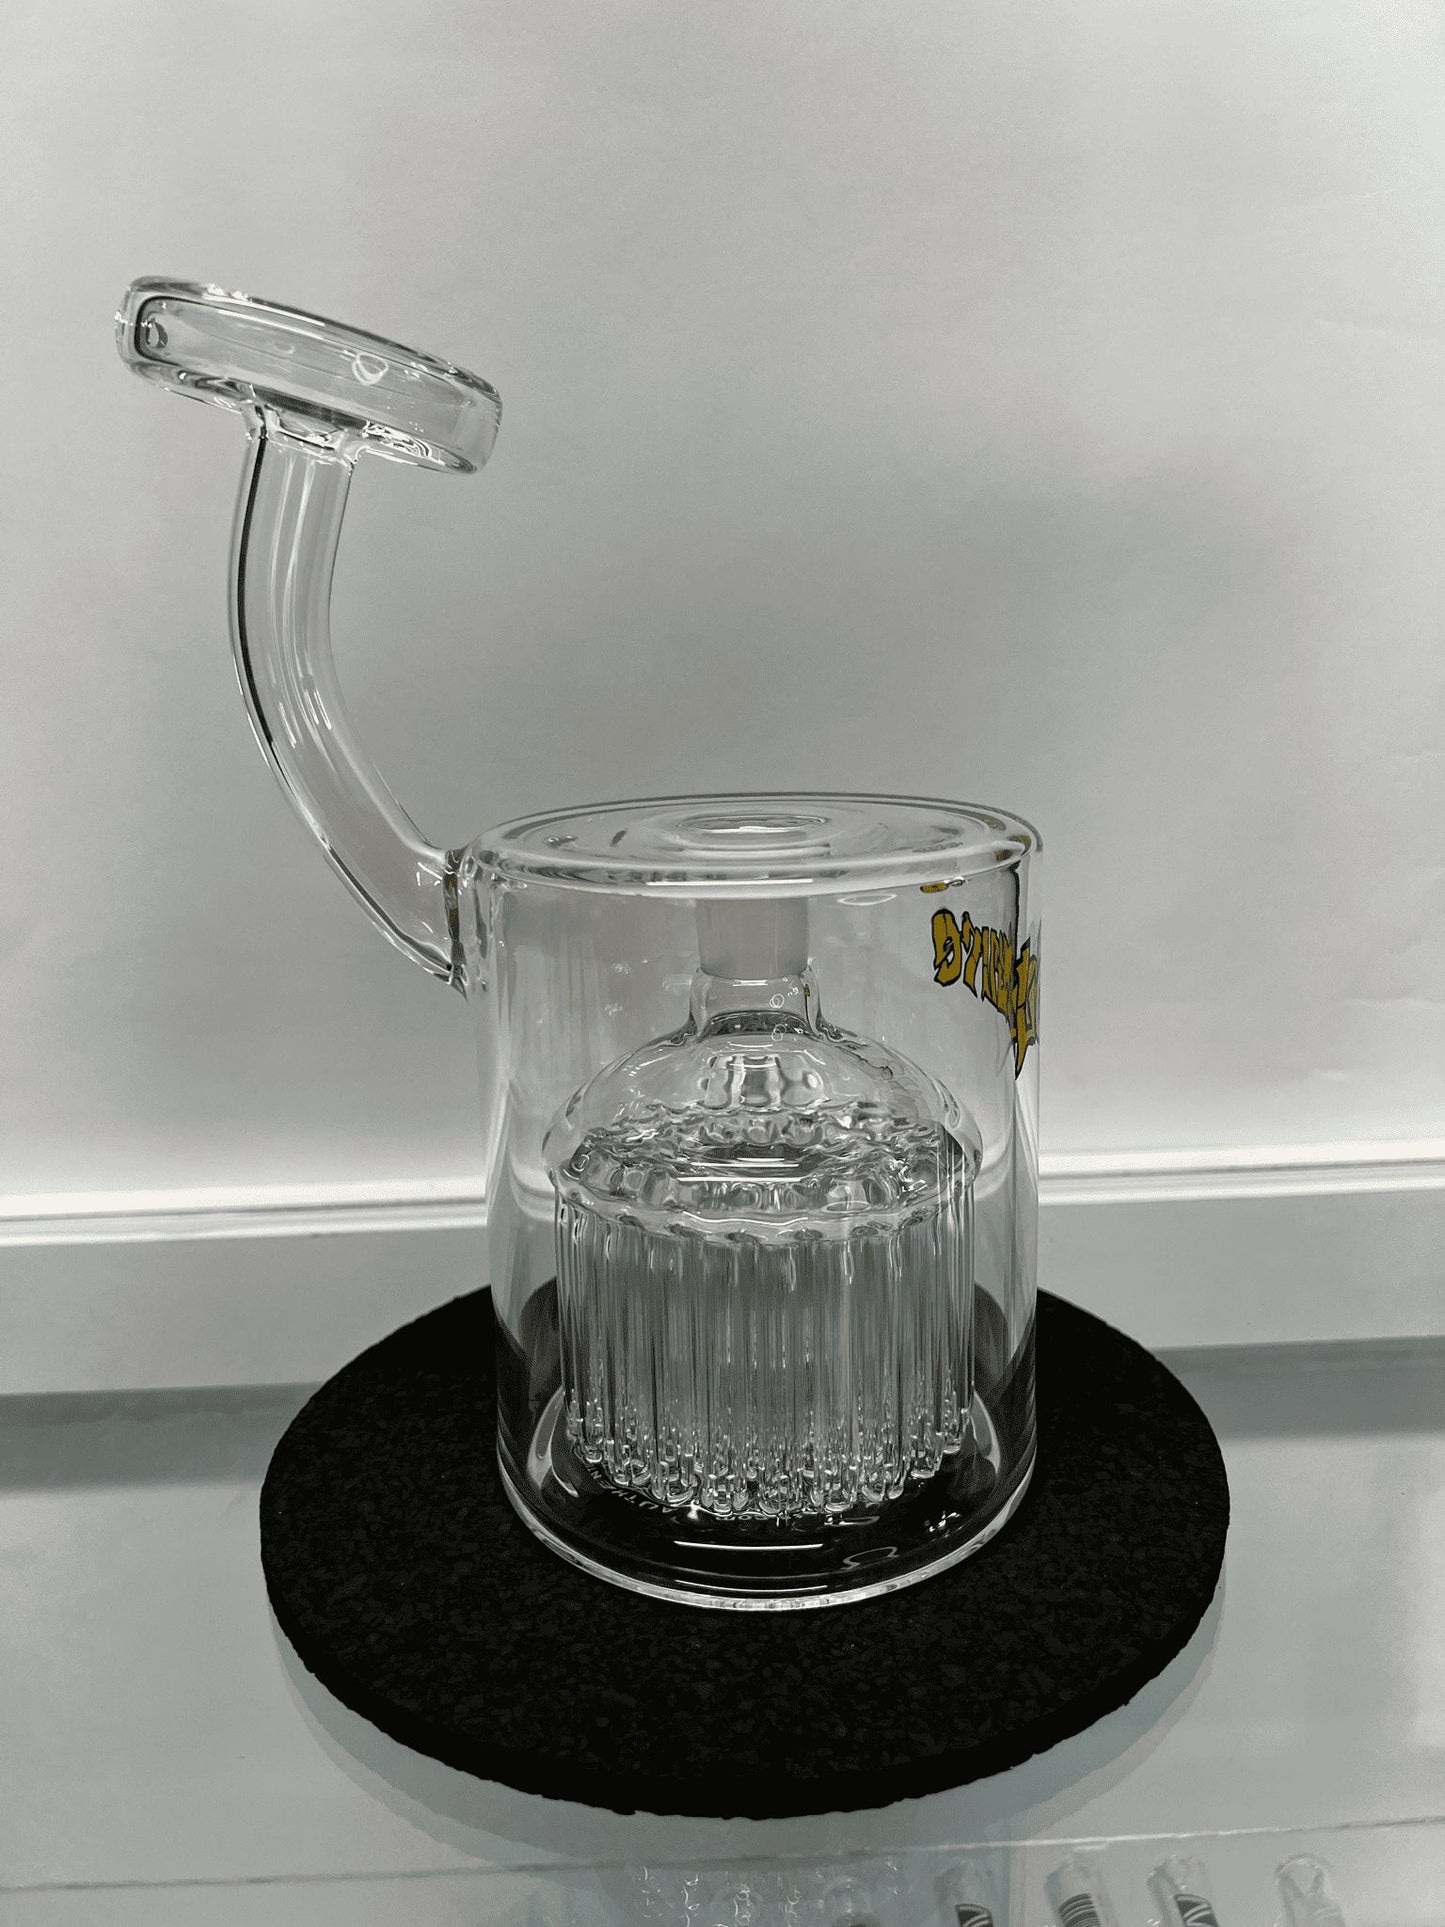 meticulously crafted design of the (L10) Leisure 54 Arm Rig/Bubbler